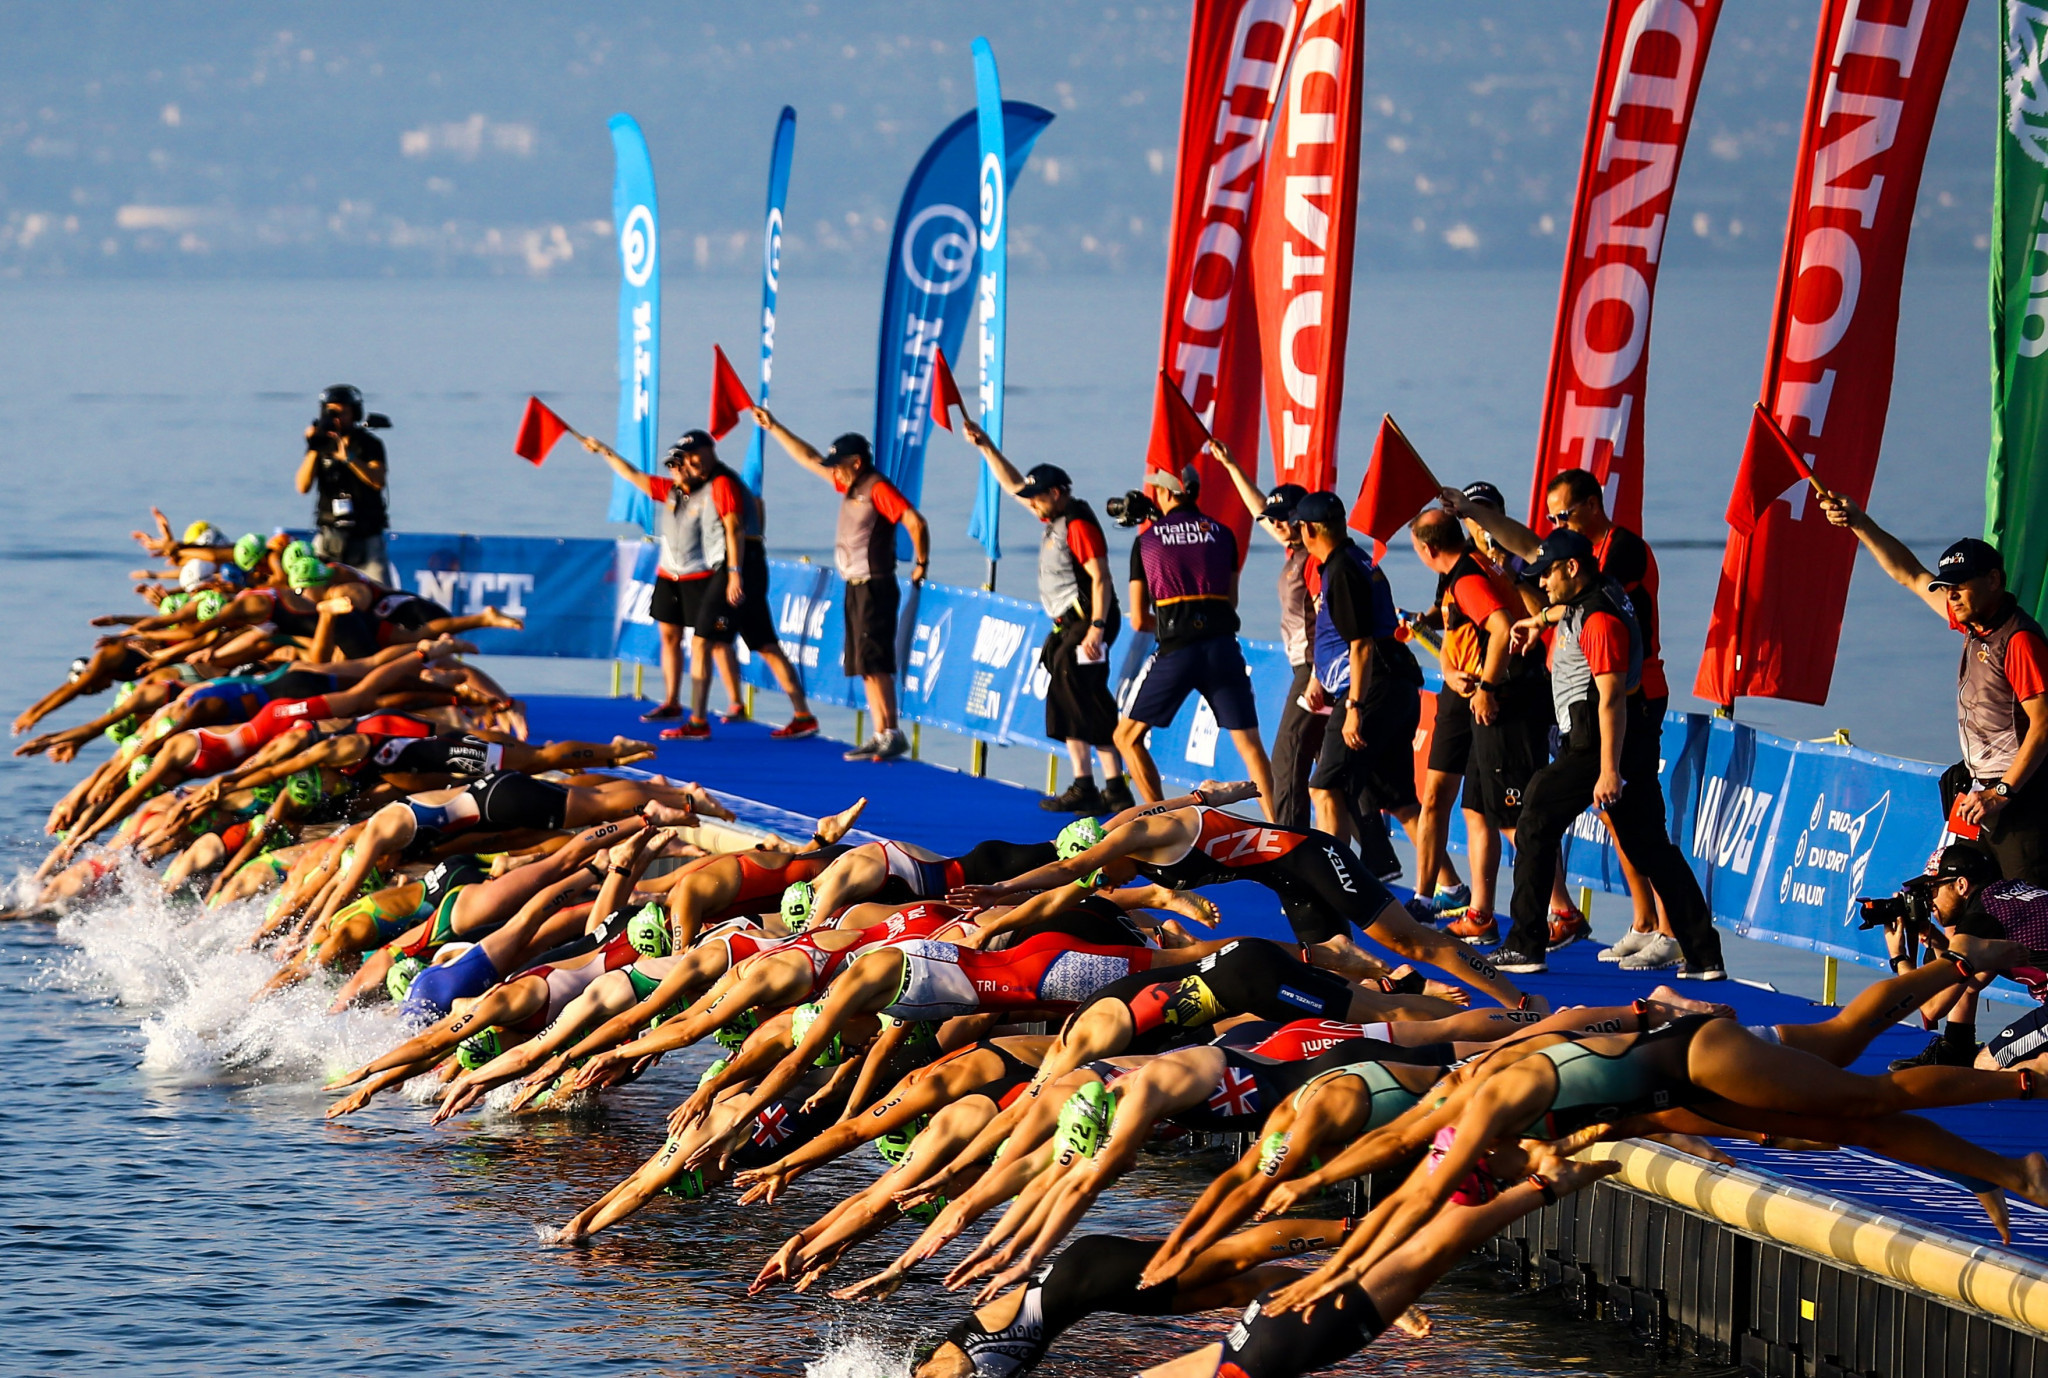 World Triathlon has launched a special fund to help athletes affected by the COVID-19 pandemic ©World Triathlon